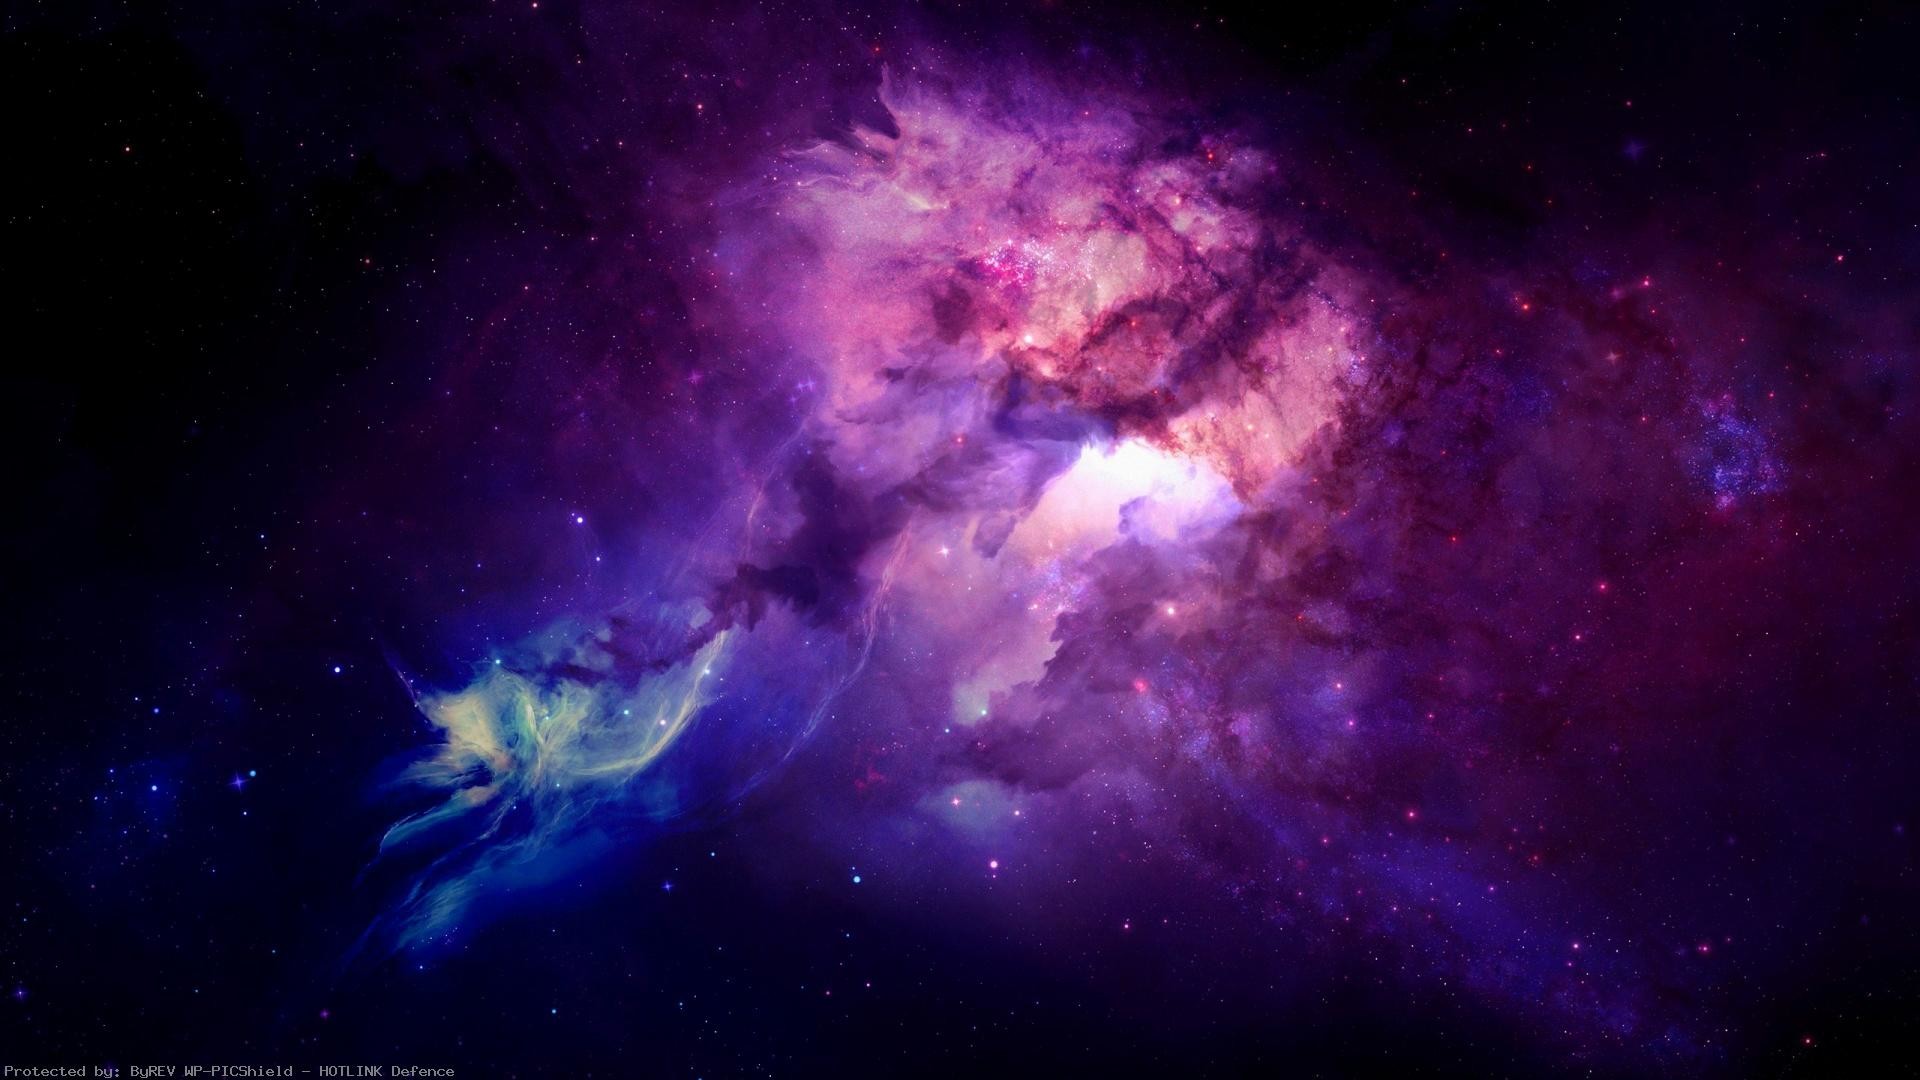 Space 1920×1080 wallpaper wp38010337